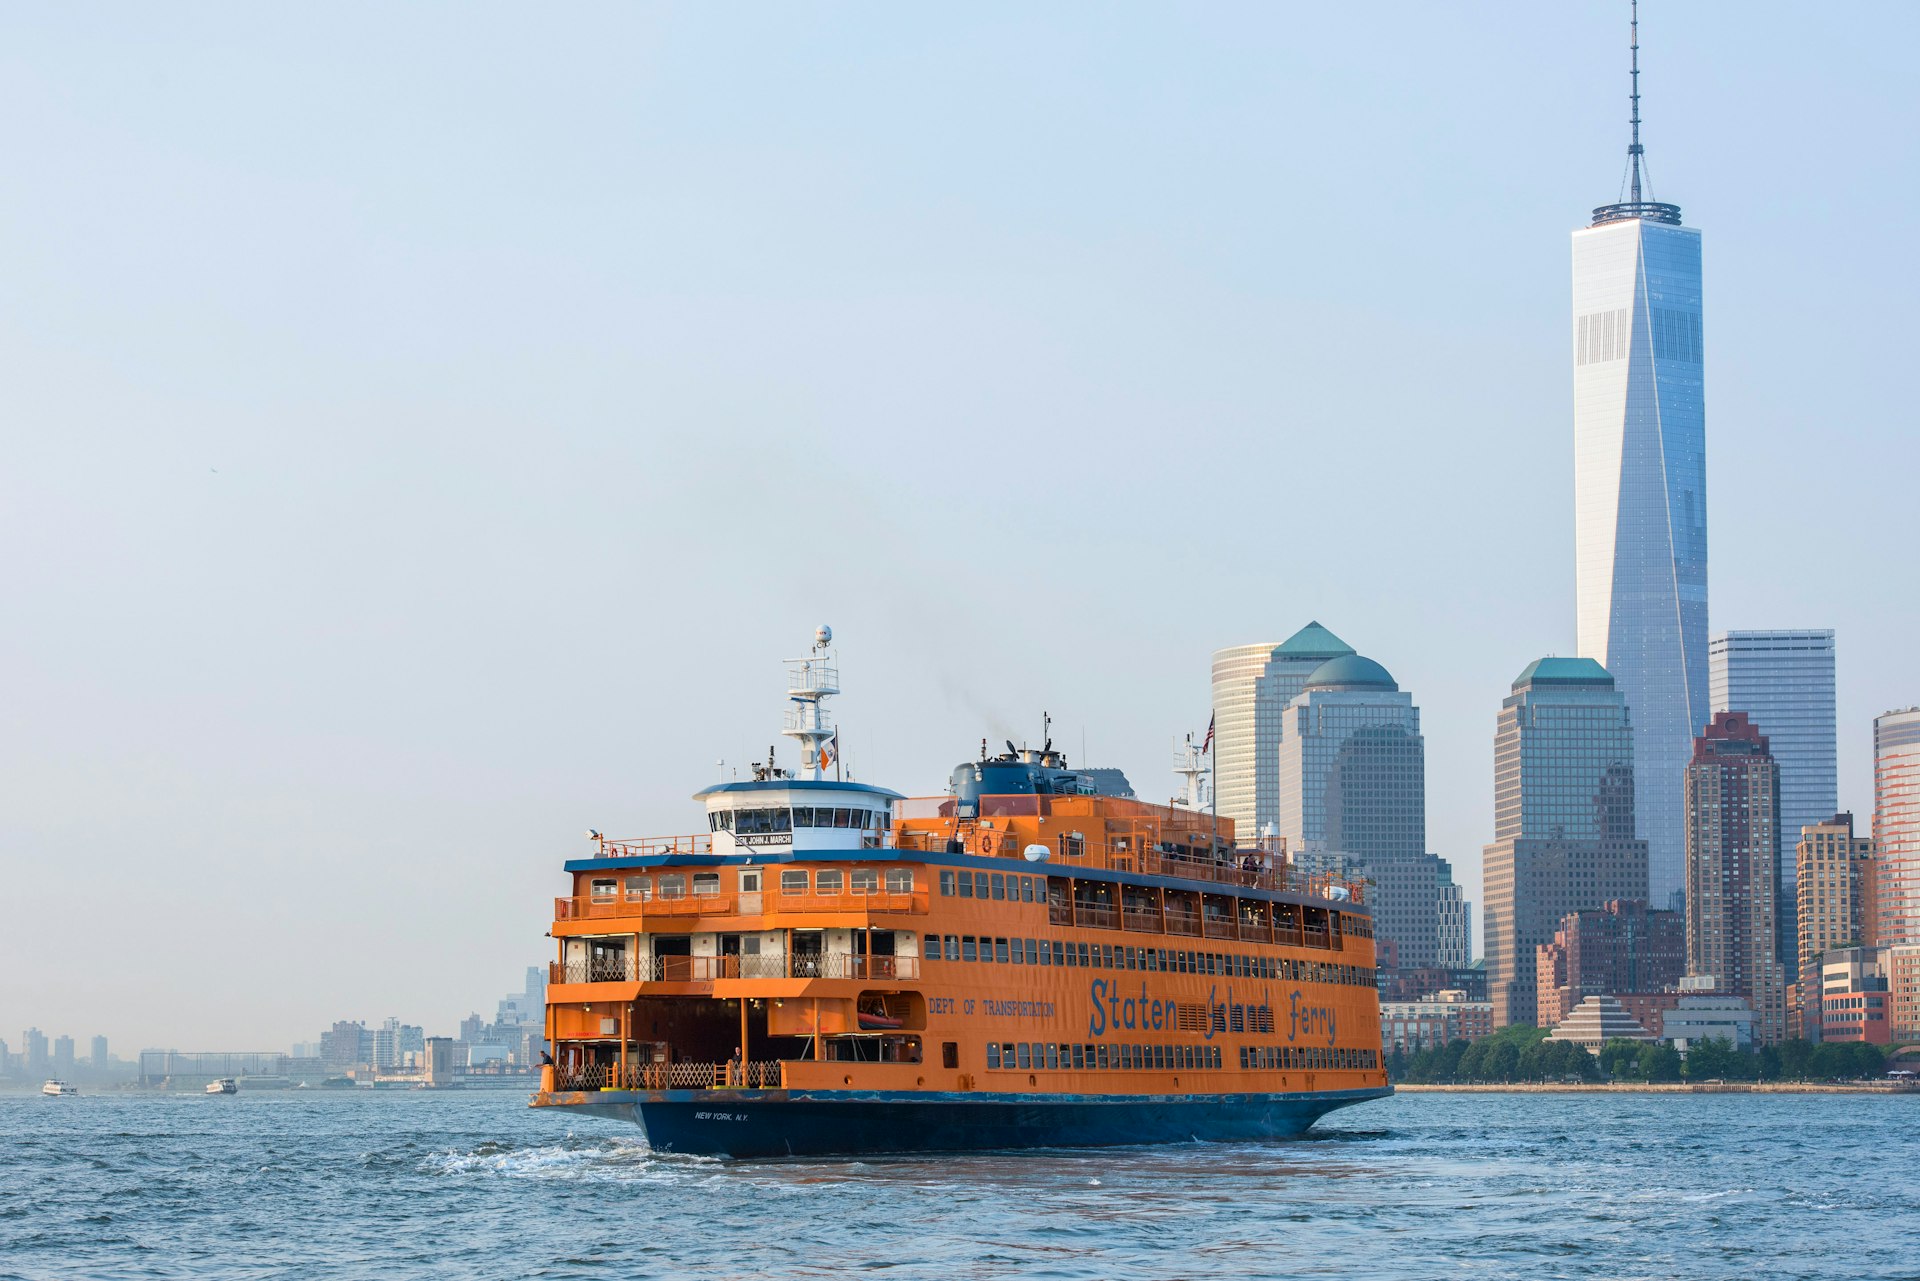 The Staten Island Ferry as seen from the water, with the Manhattan skyline in the background